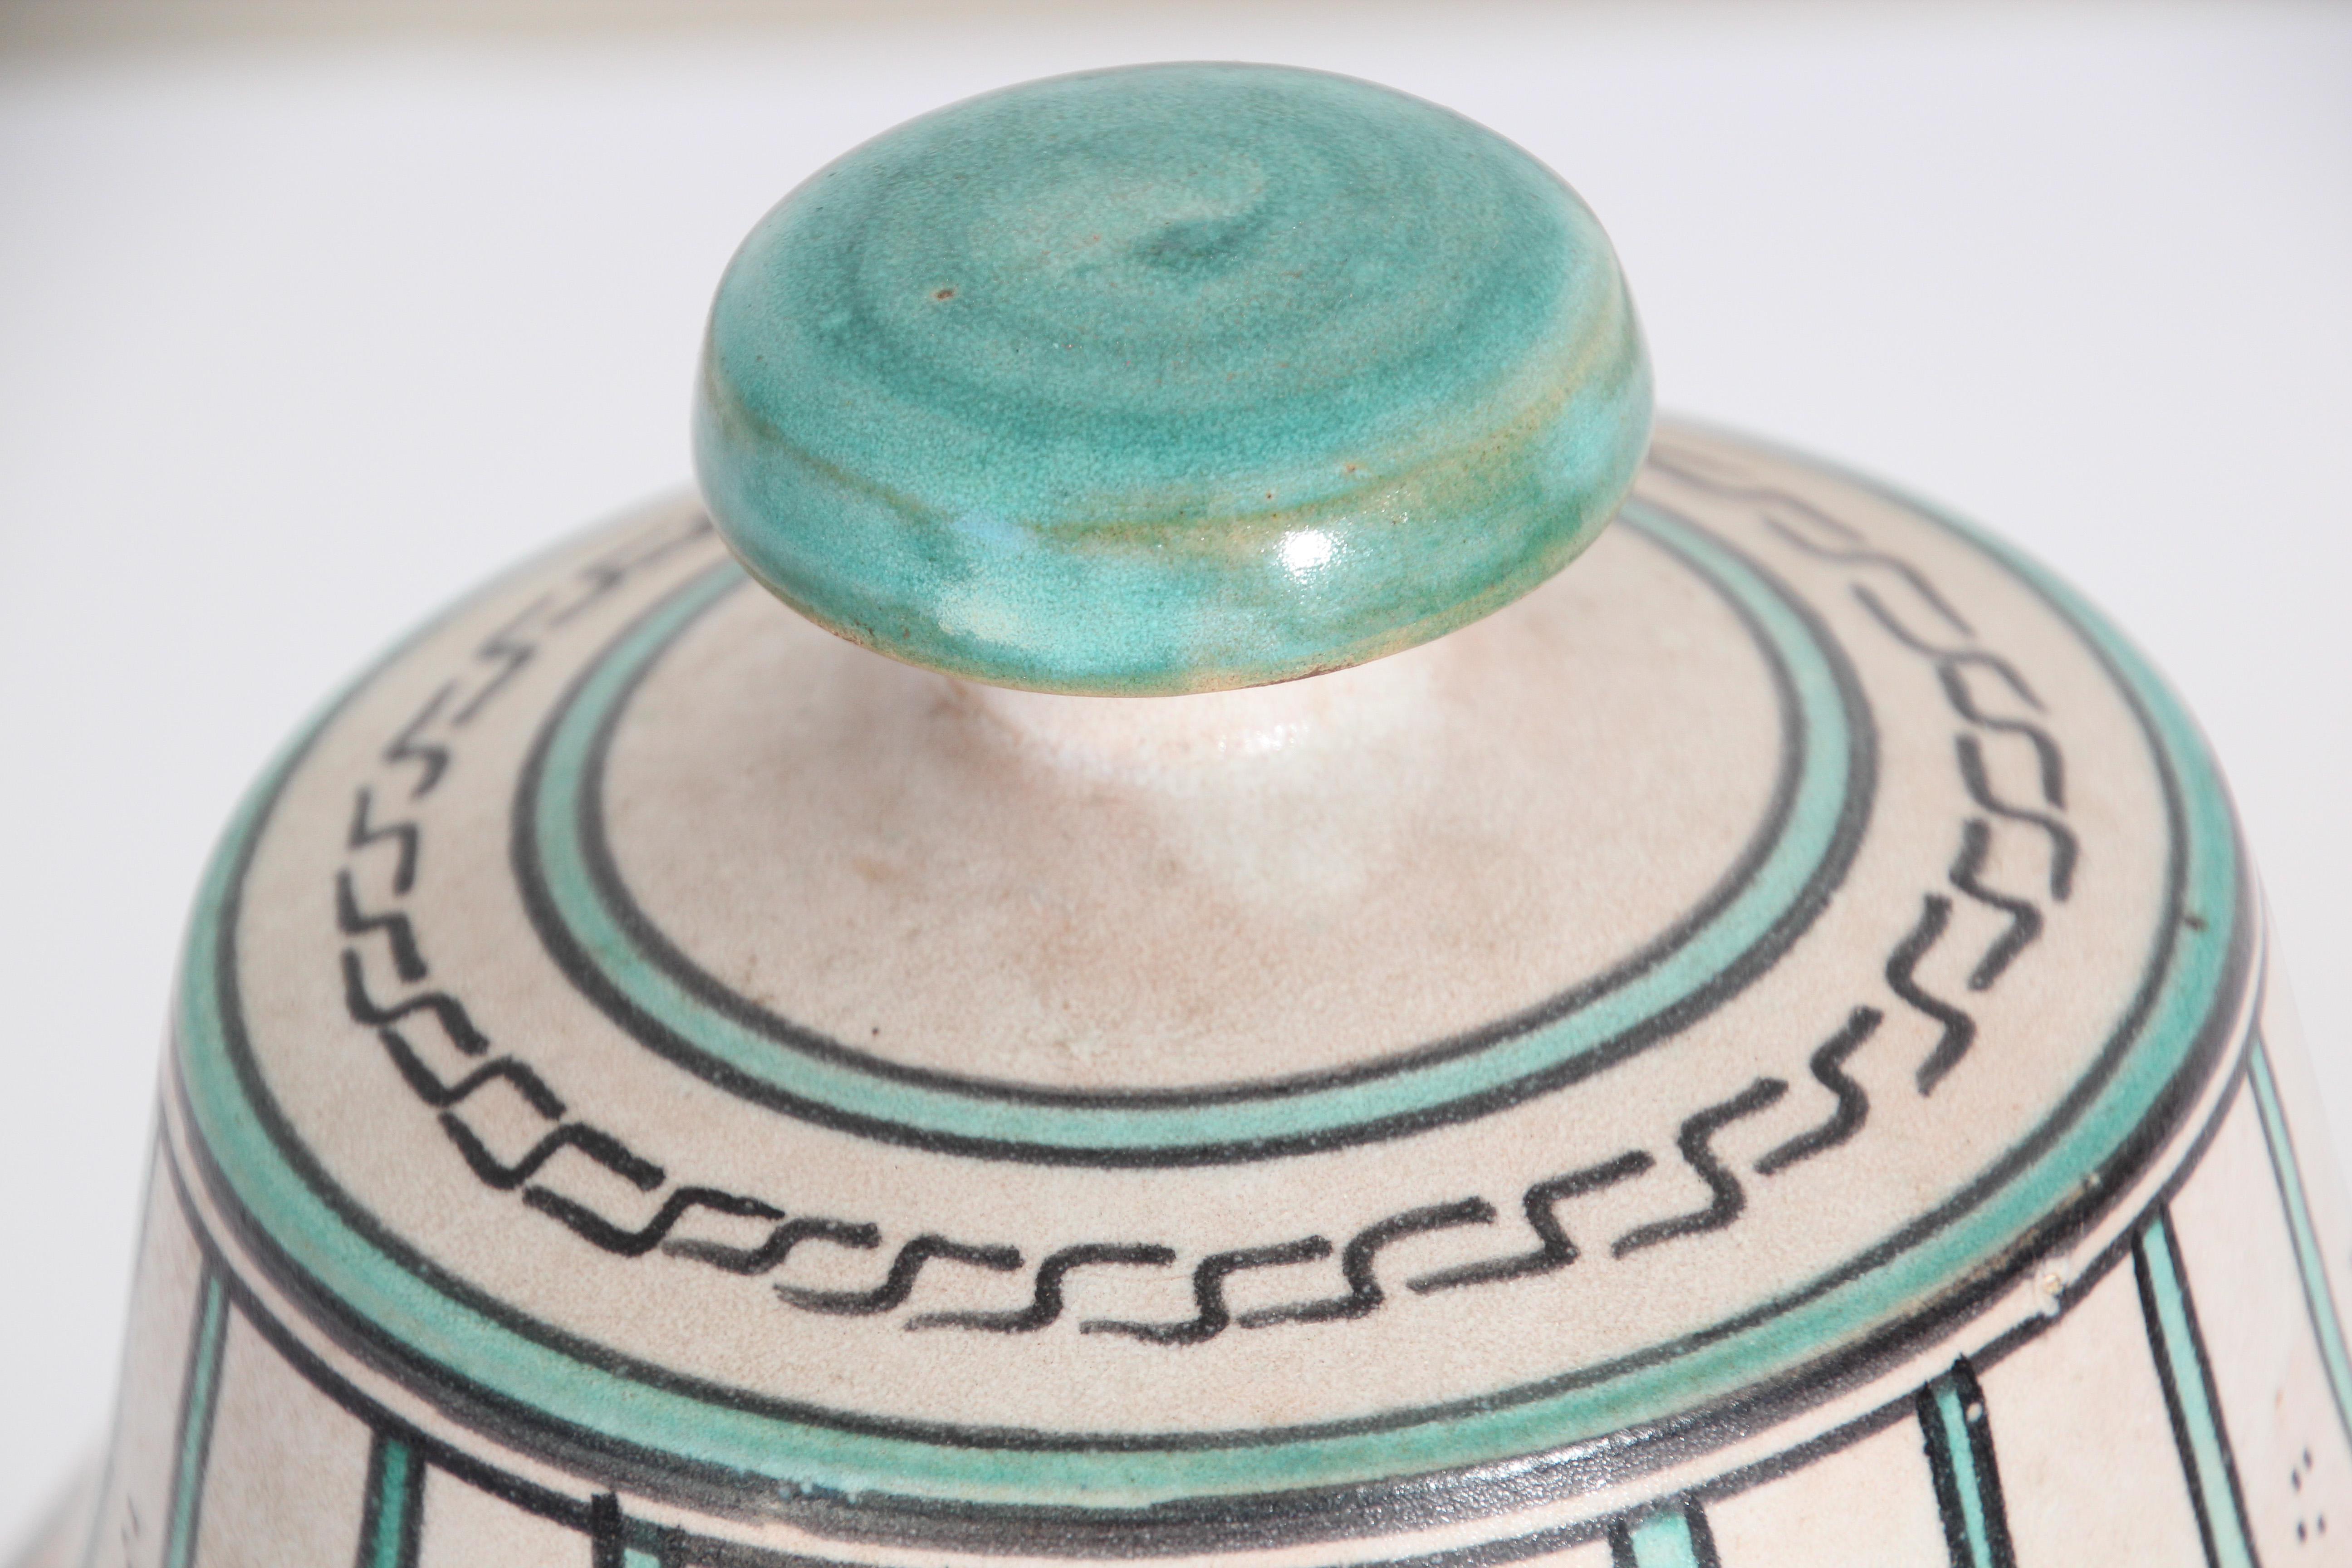 Moorish Ceramic Glazed Covered Urn Handcrafted in Fez Morocco For Sale 3